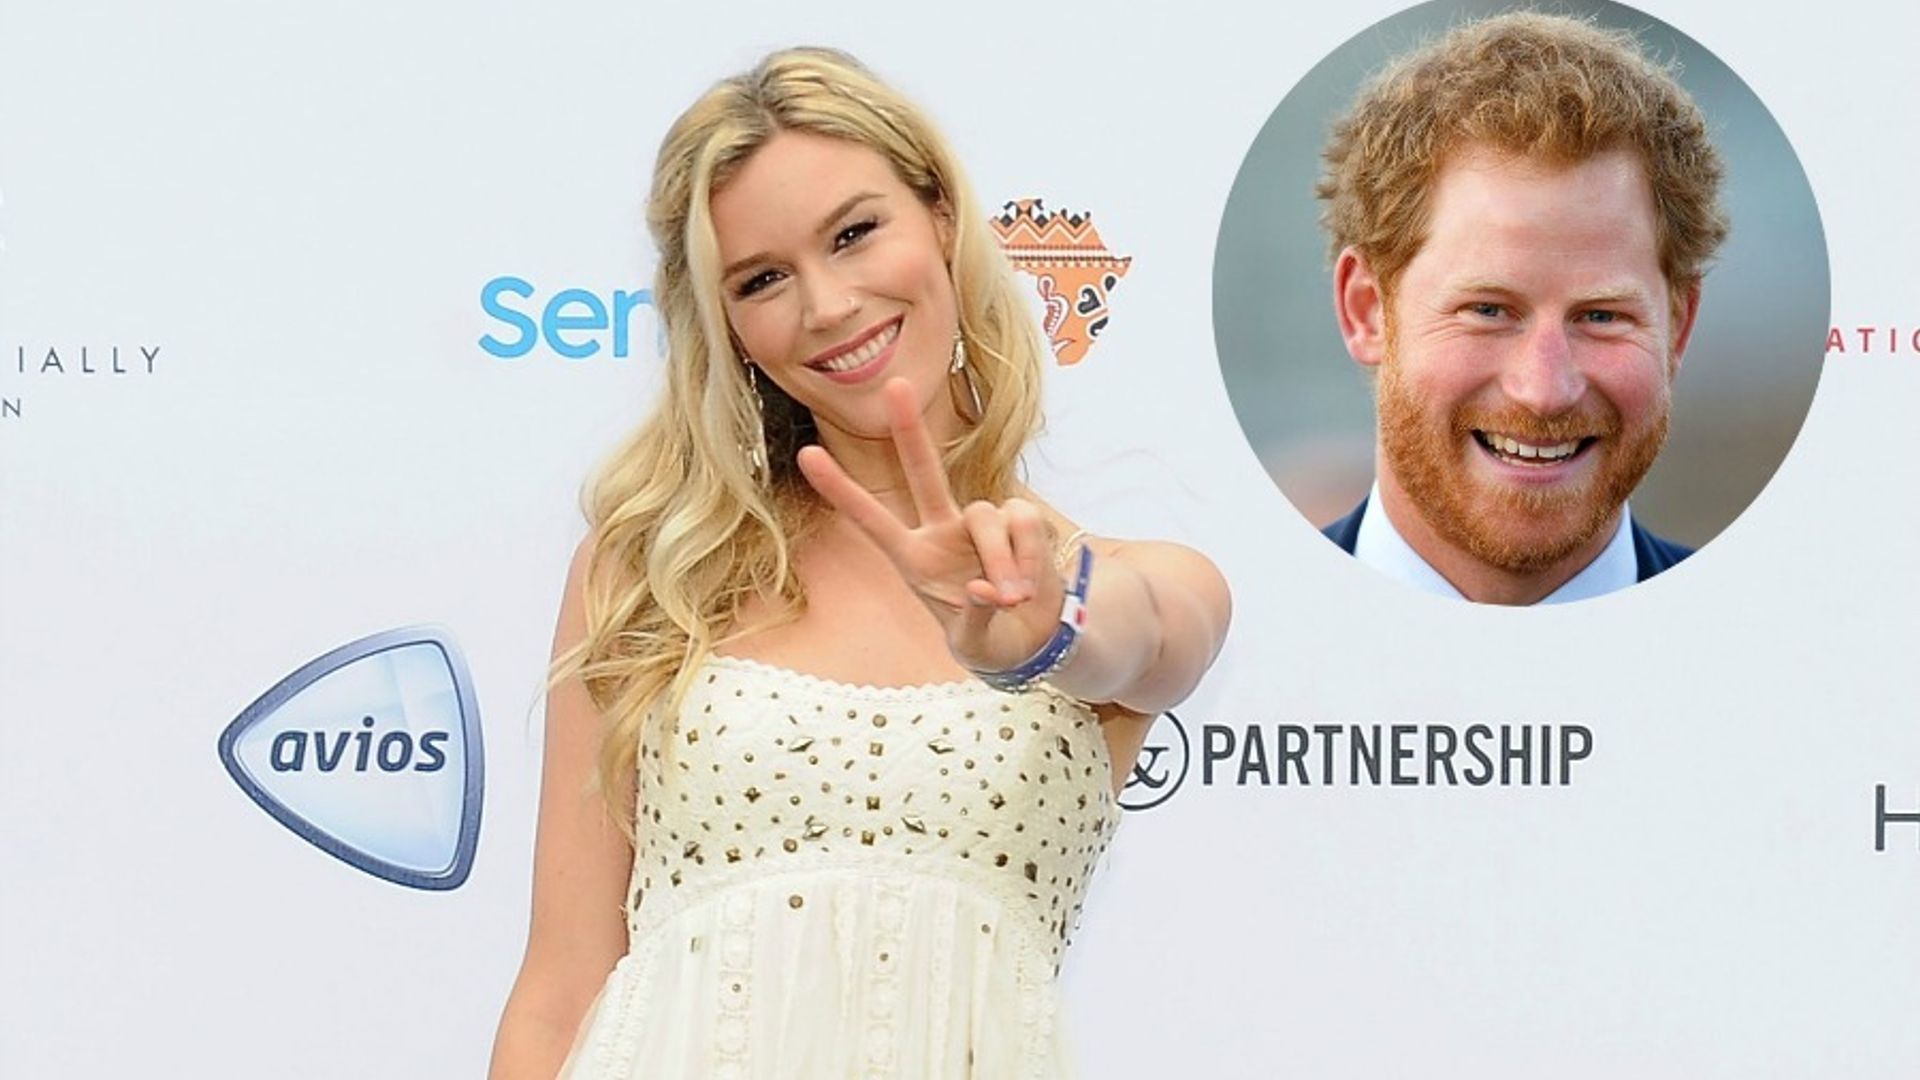 Joss Stone on Prince Harry's dance moves and her friendship with the royal